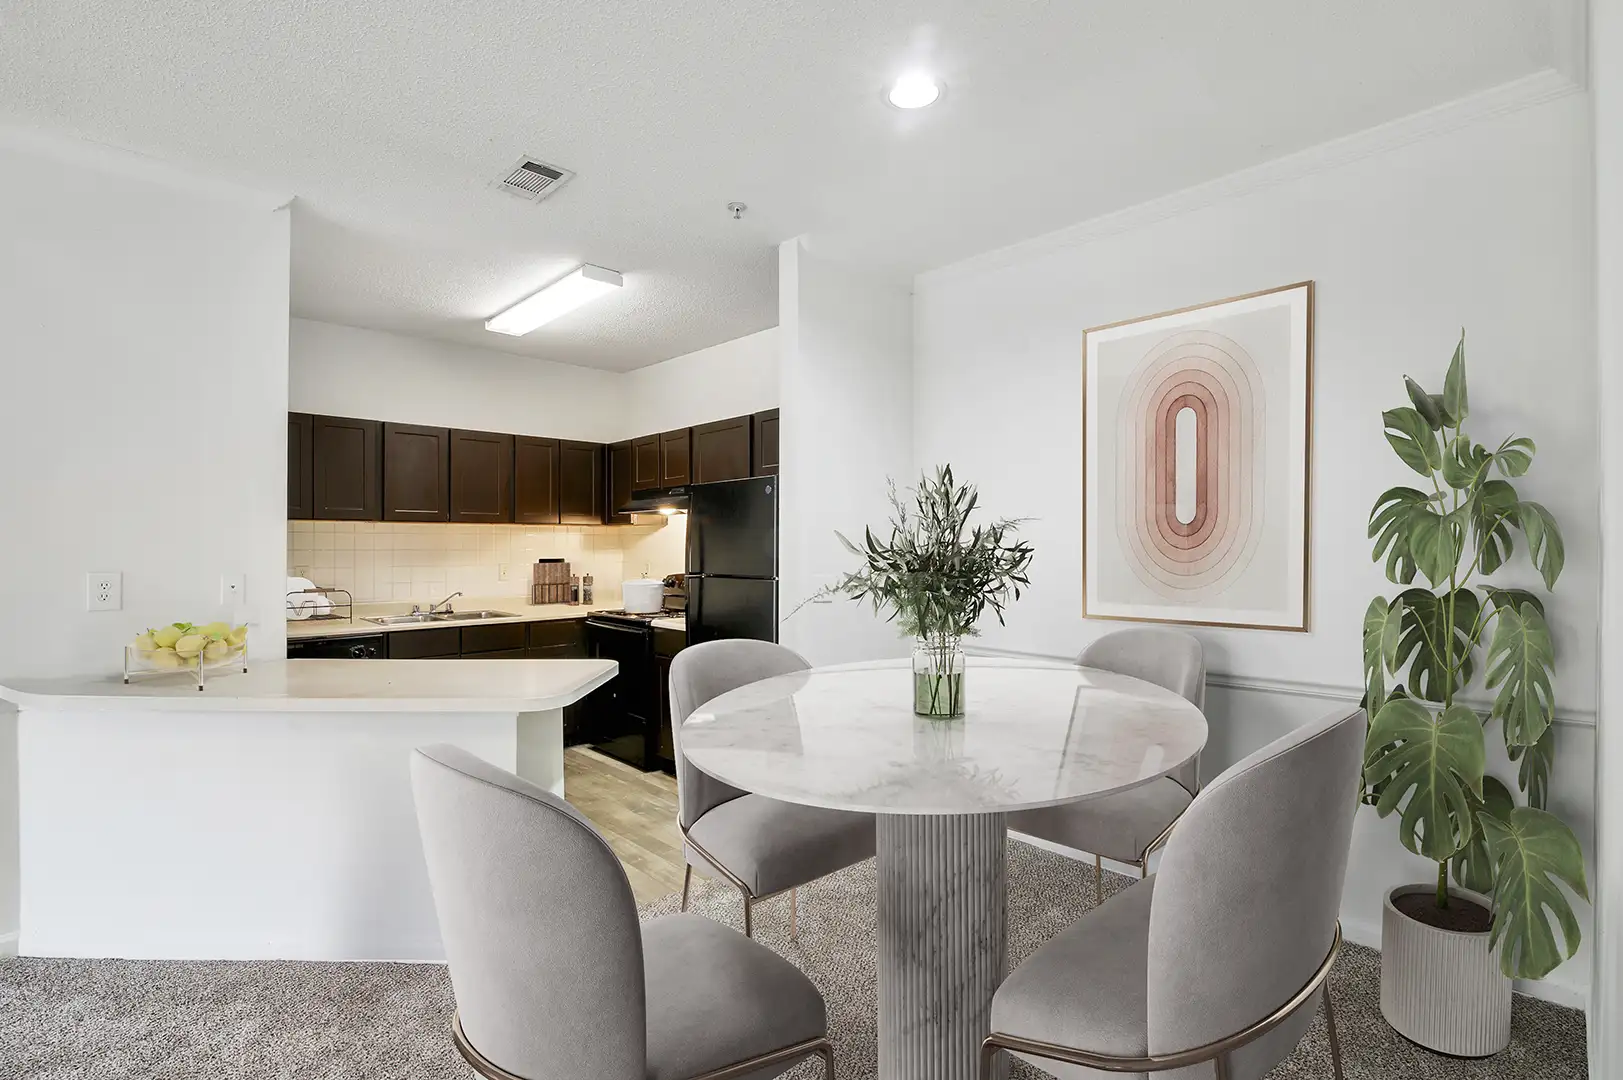 Model dining area next to a kitchen with wood-like floor, espresso cabinetry, and stainless steel appliances.